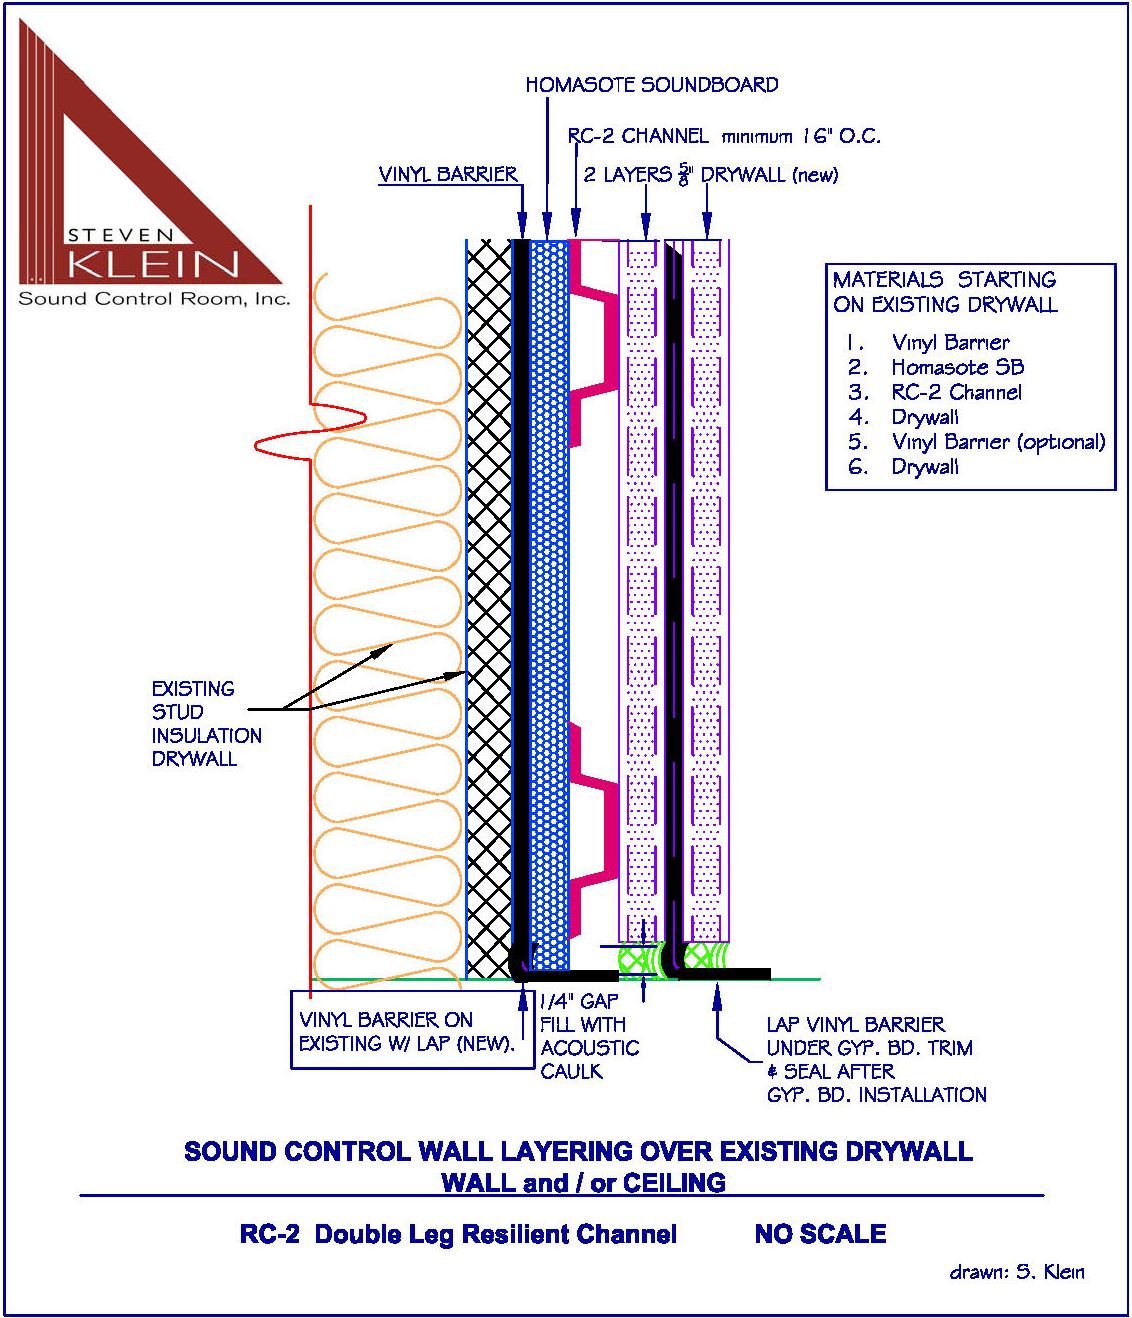 Sound Control Wall Layering Over Existing Drywall Details